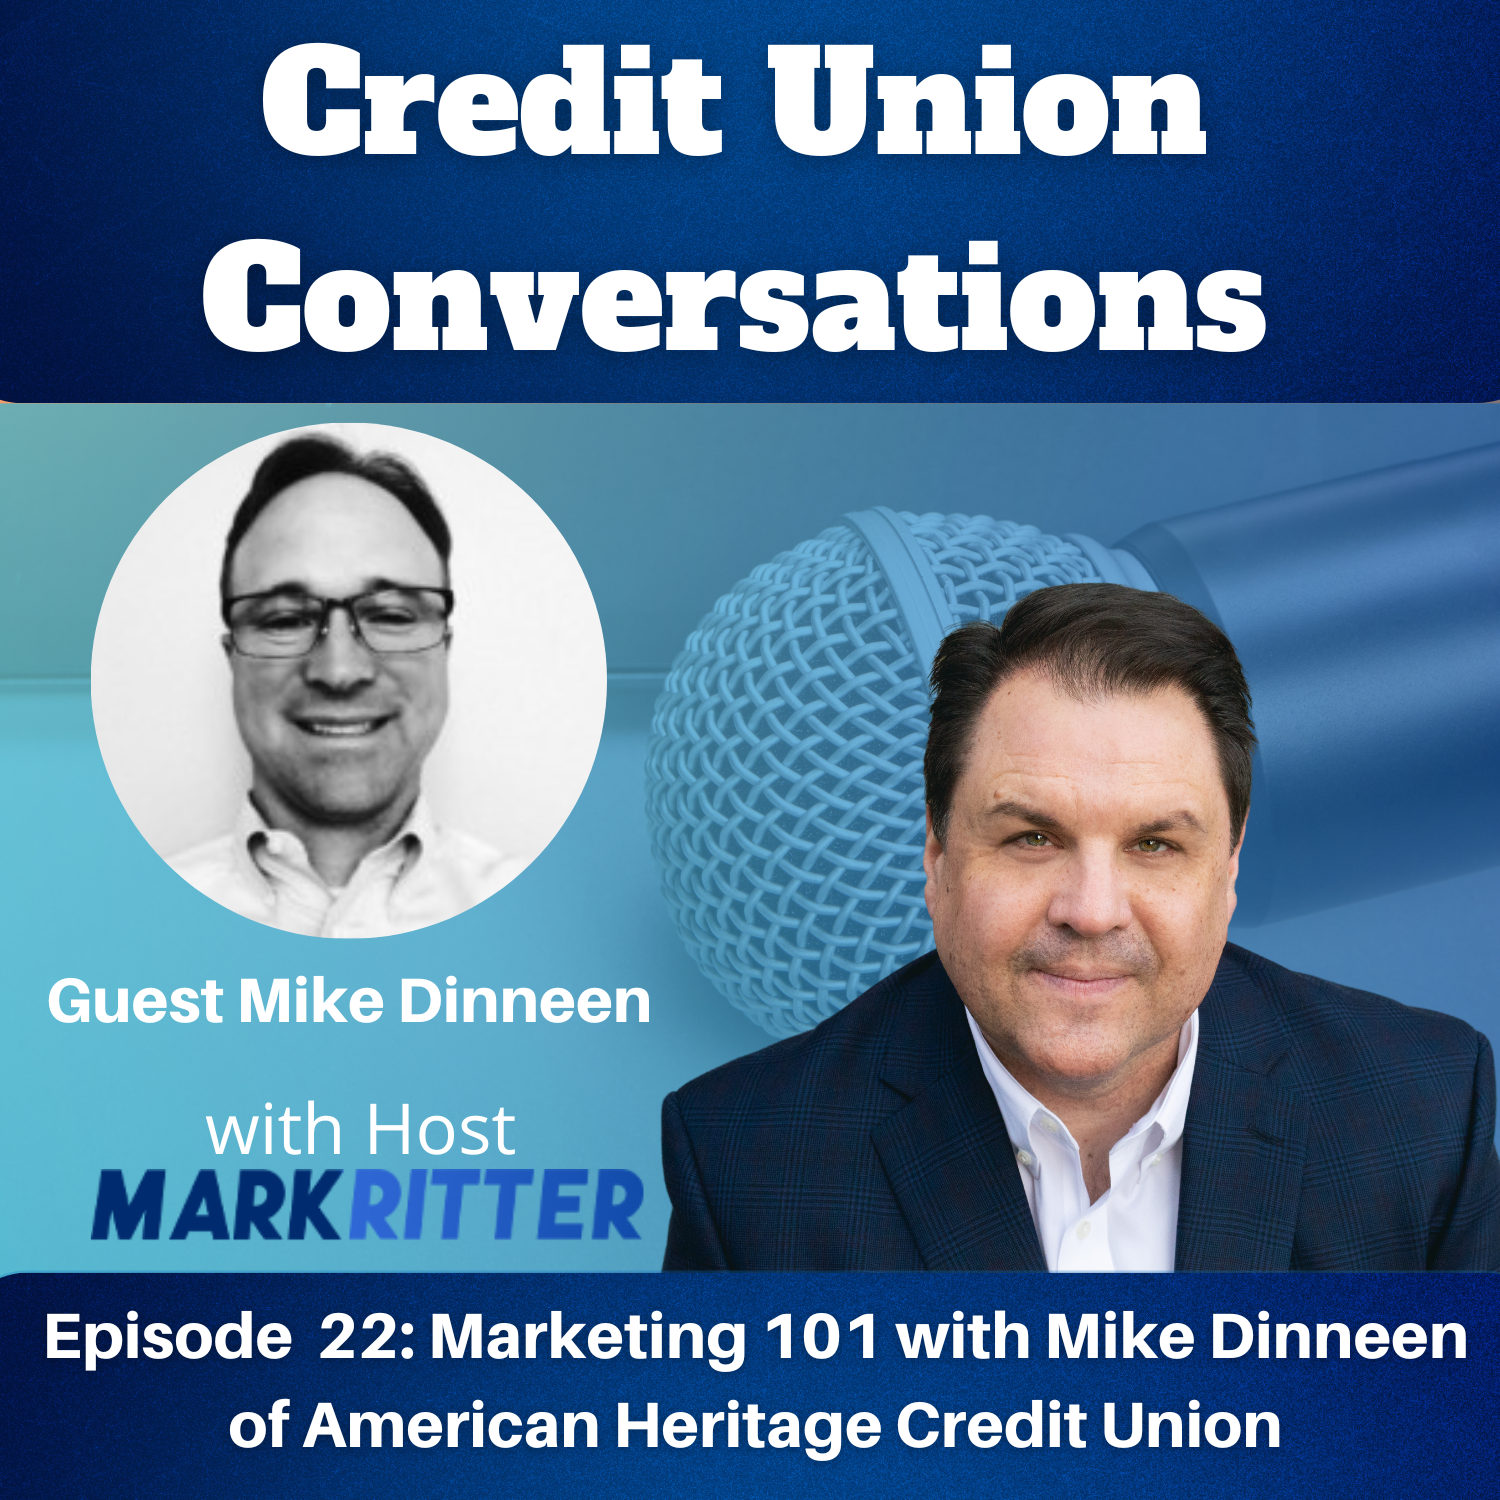 Marketing 101 with Mike Dinneen of American Heritage Credit Union